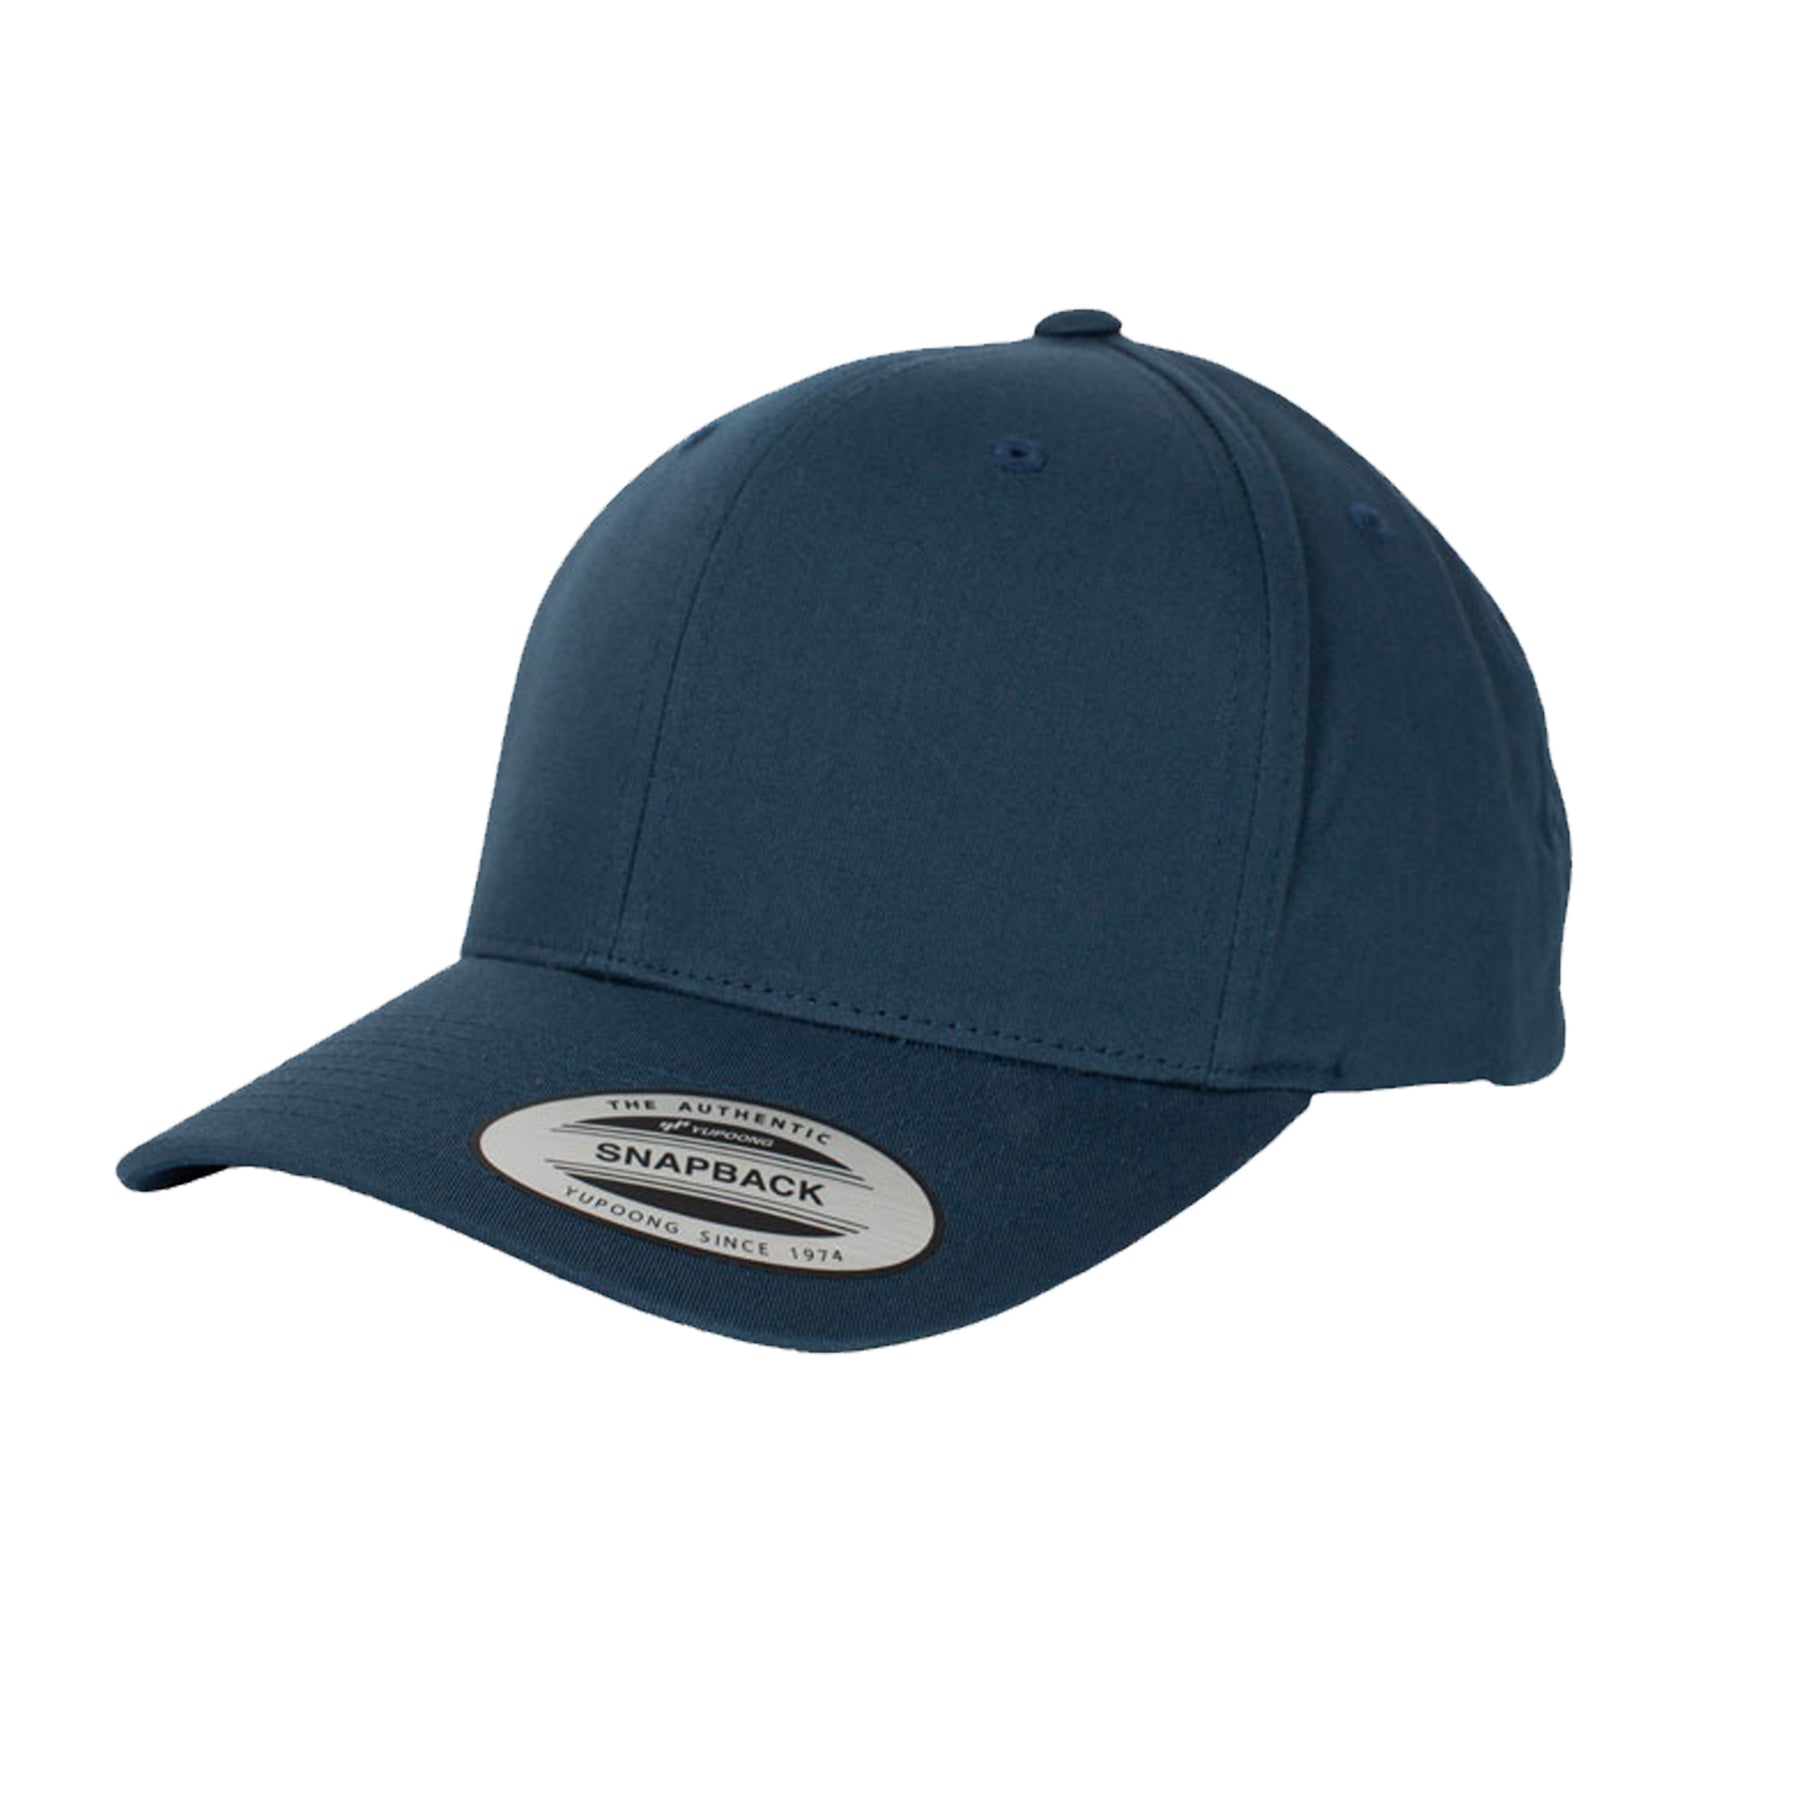 yupoong classic cap in navy